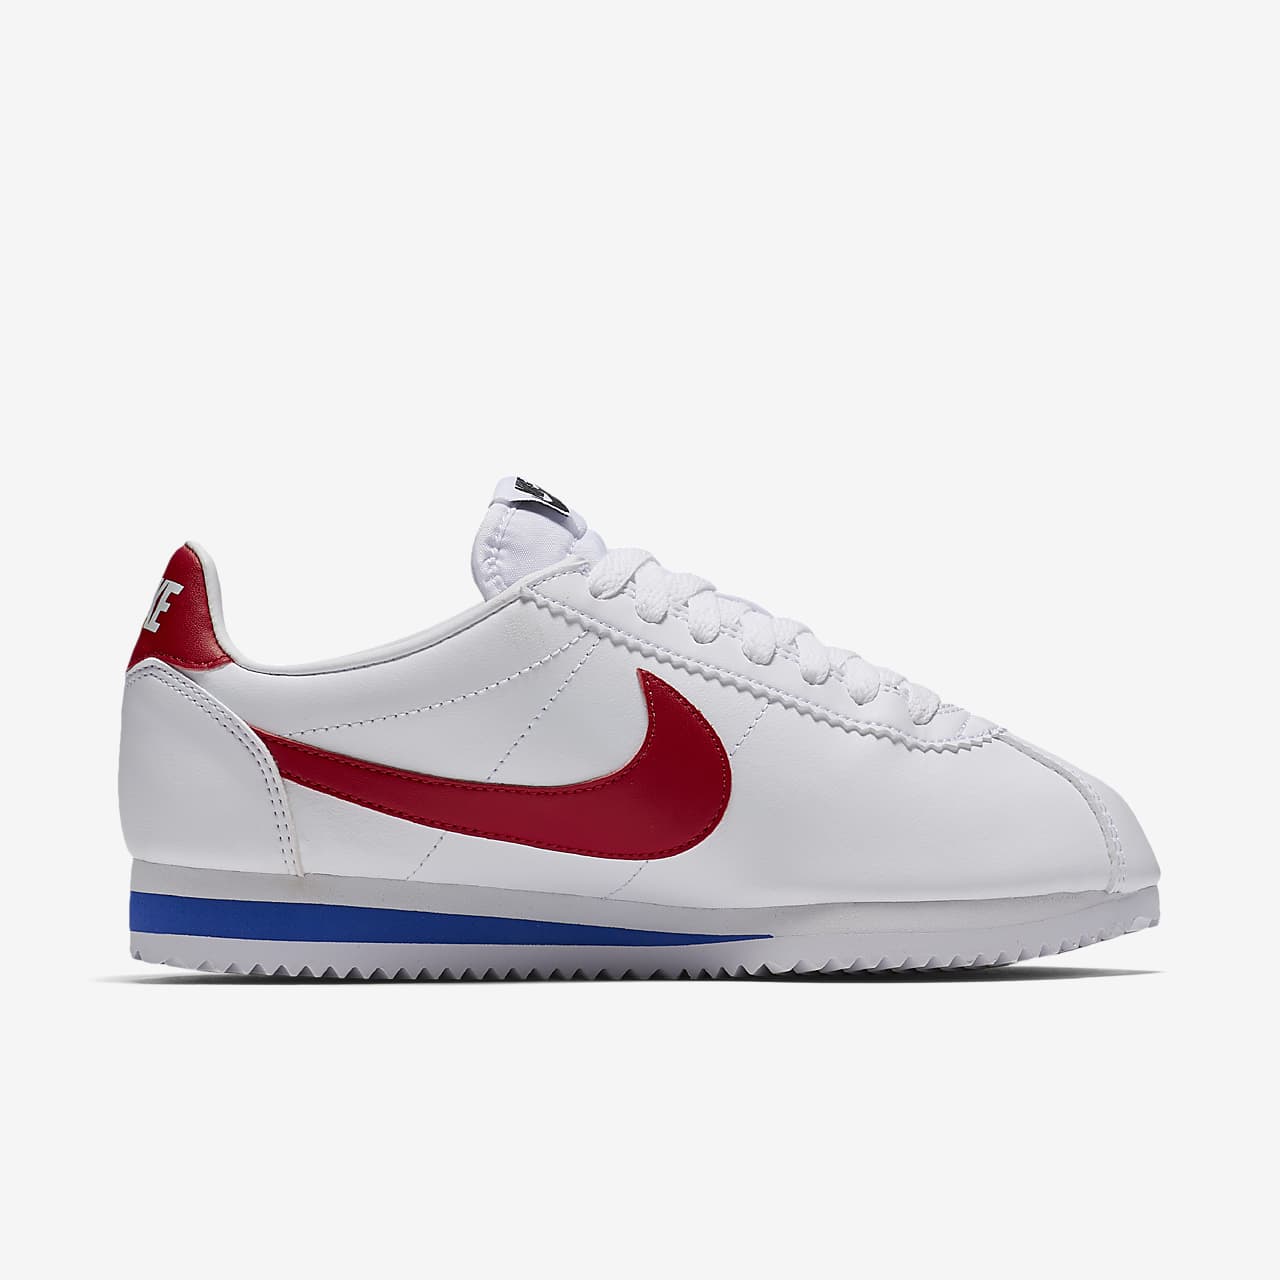 nike cortez pink leather